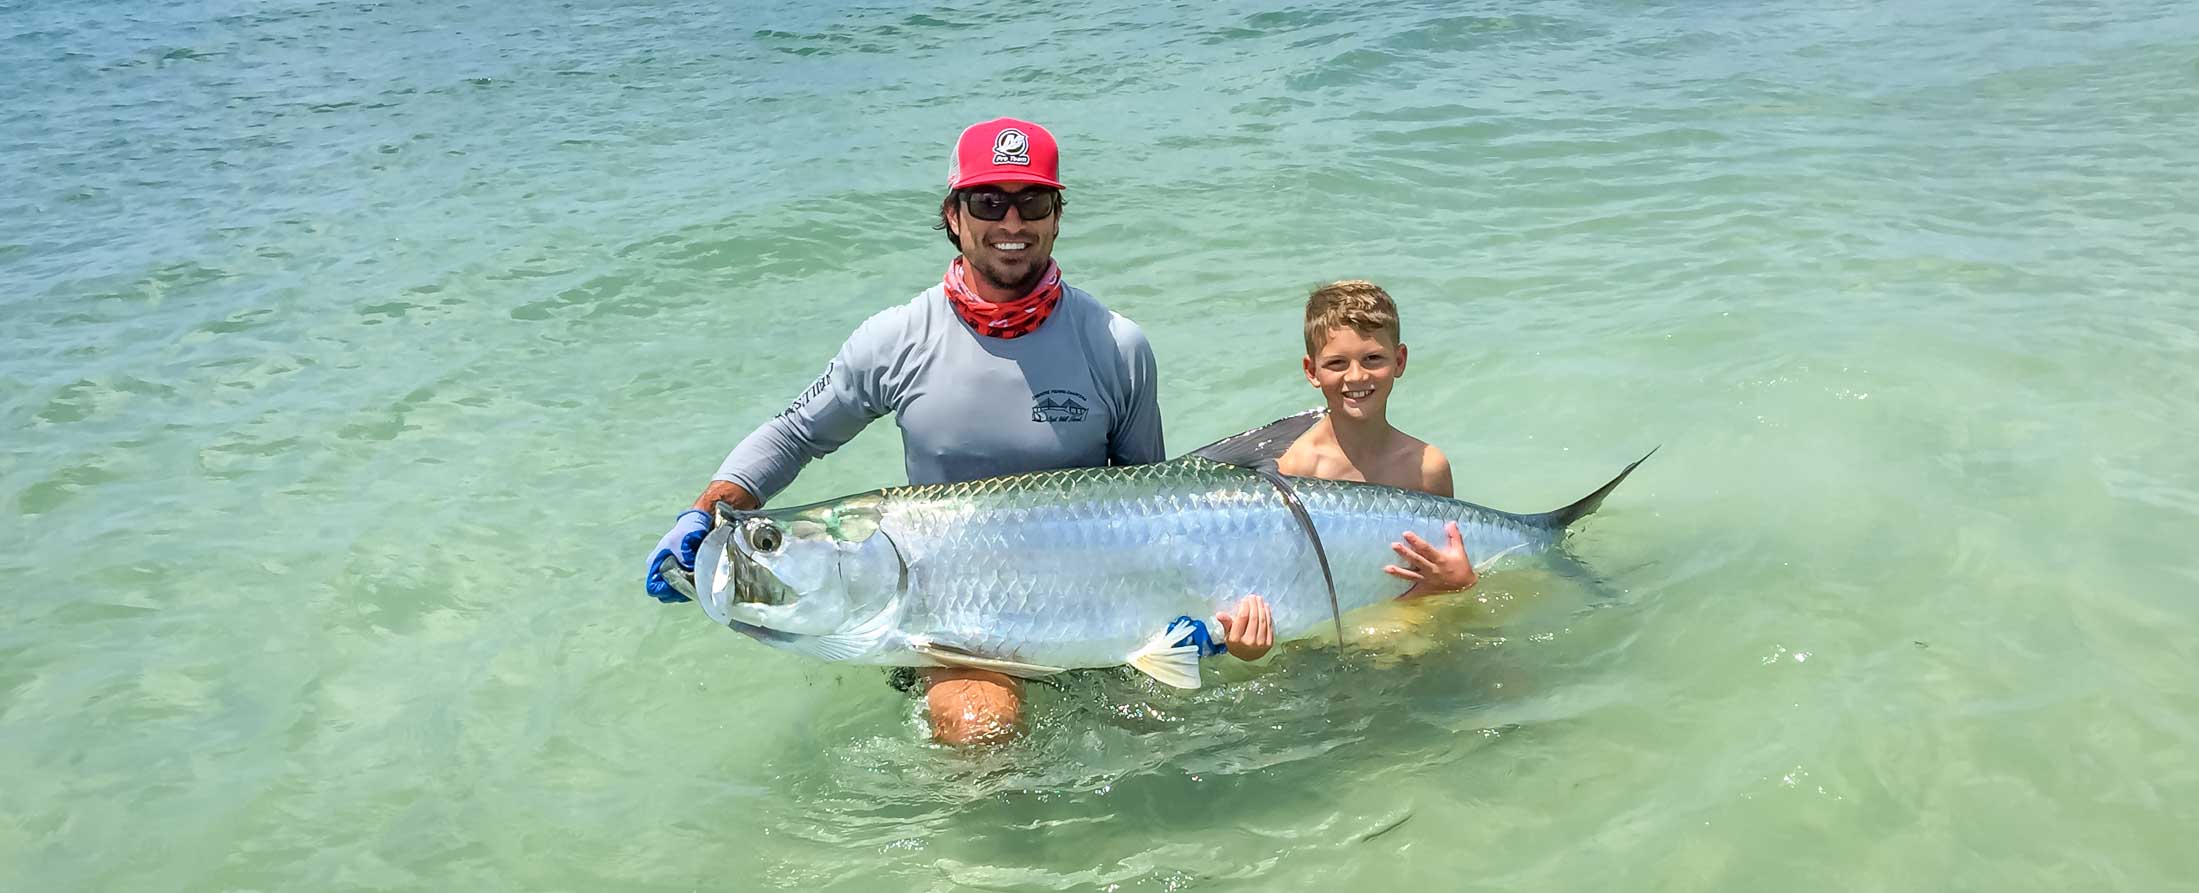 Tampa Fishing Charters | Tampa, FL – Offering full and half day Tampa Bay  fishing charters with professional USCG licensed Captain Will Shook.  Specializing in Snook, Tarpon, and Redfish.